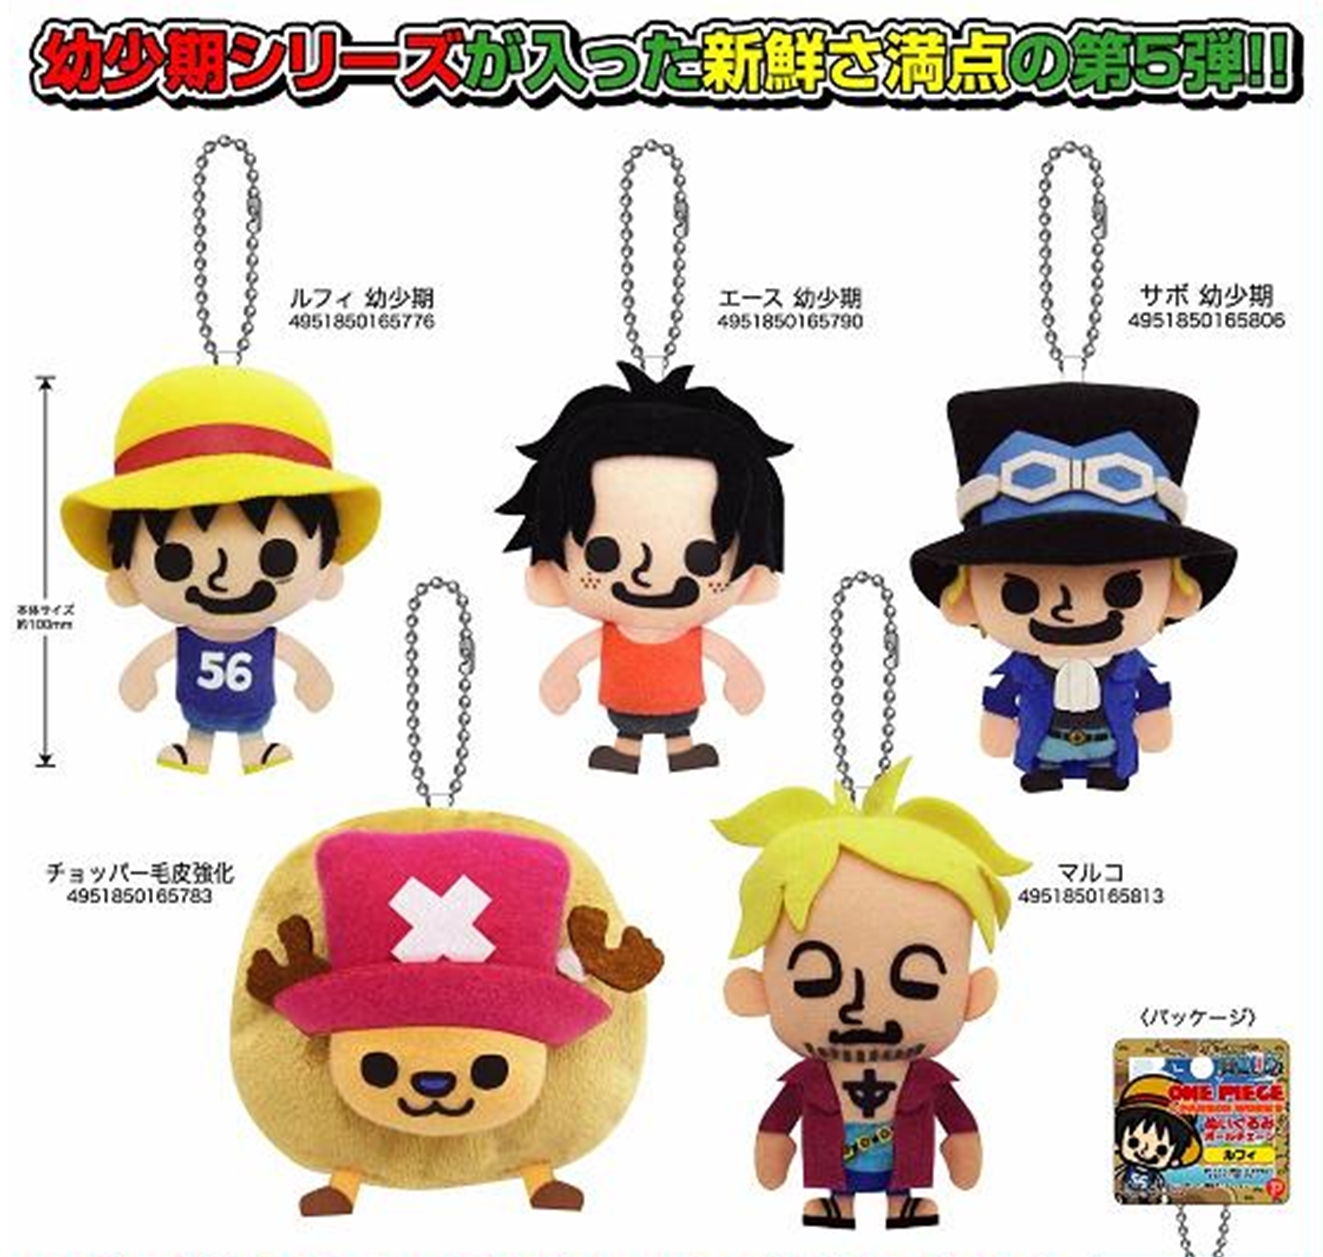 One Piece X Panson Works Mascot Ball Chain Vol 5 Milestone Inc Group Set Product Detail Information